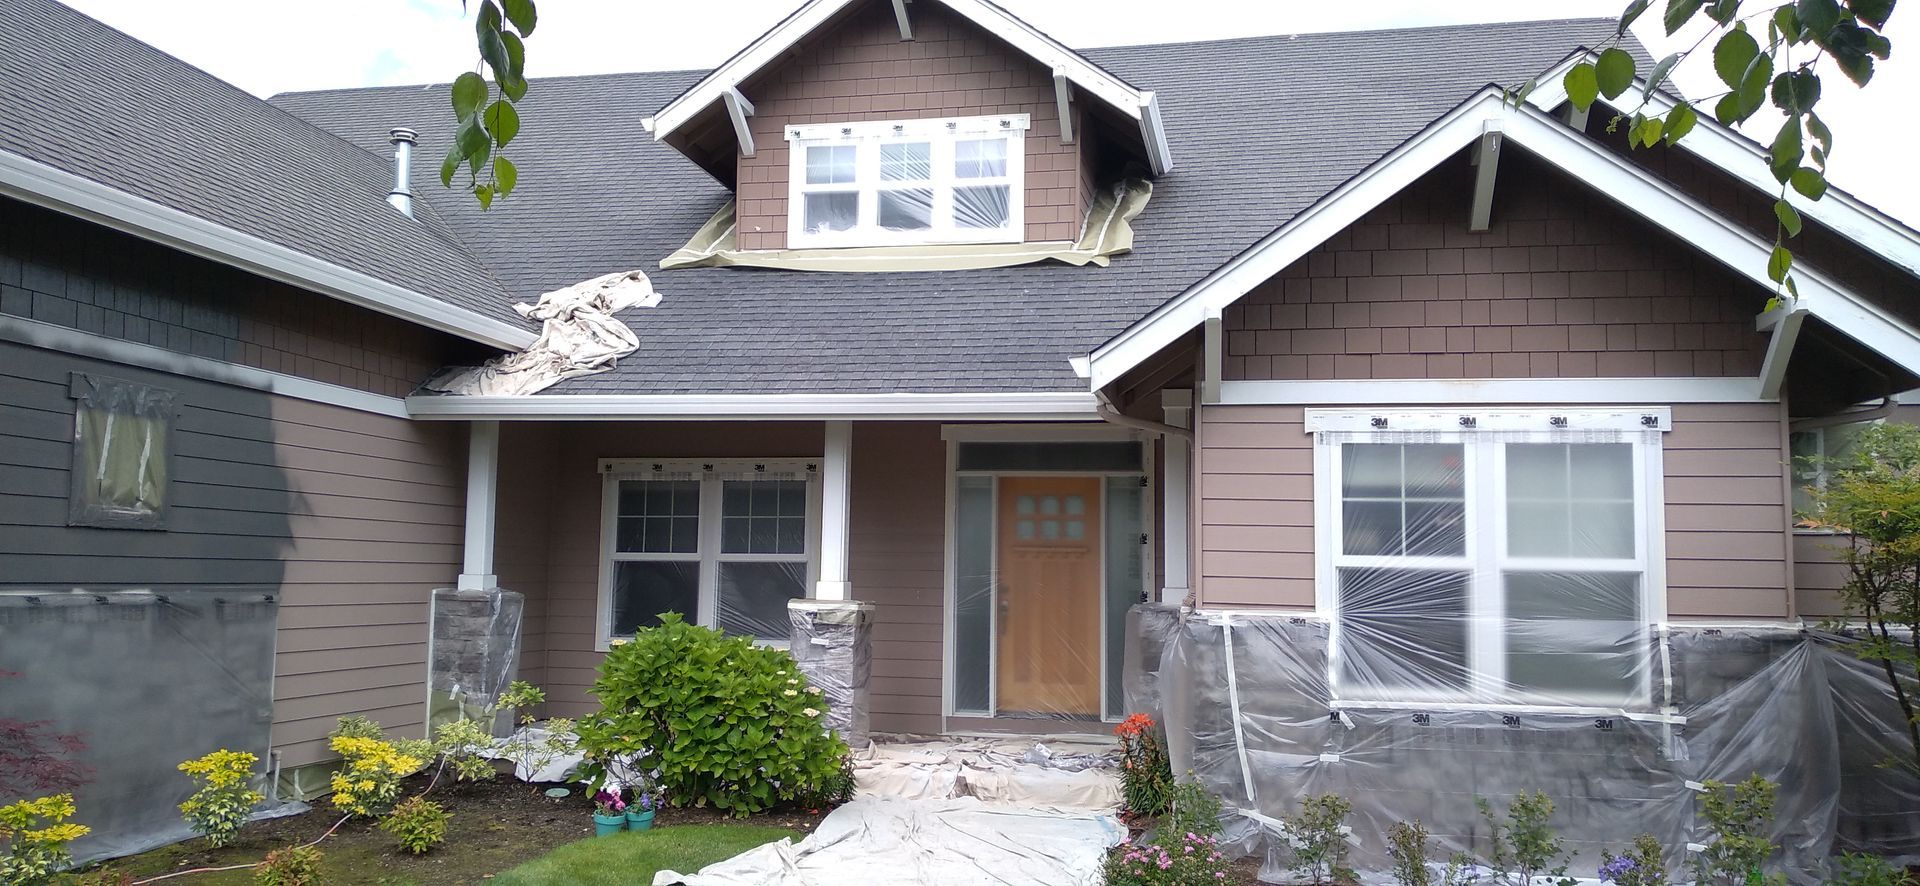 Exterior Painting | All Purpose Painting & More | Eugene, OR